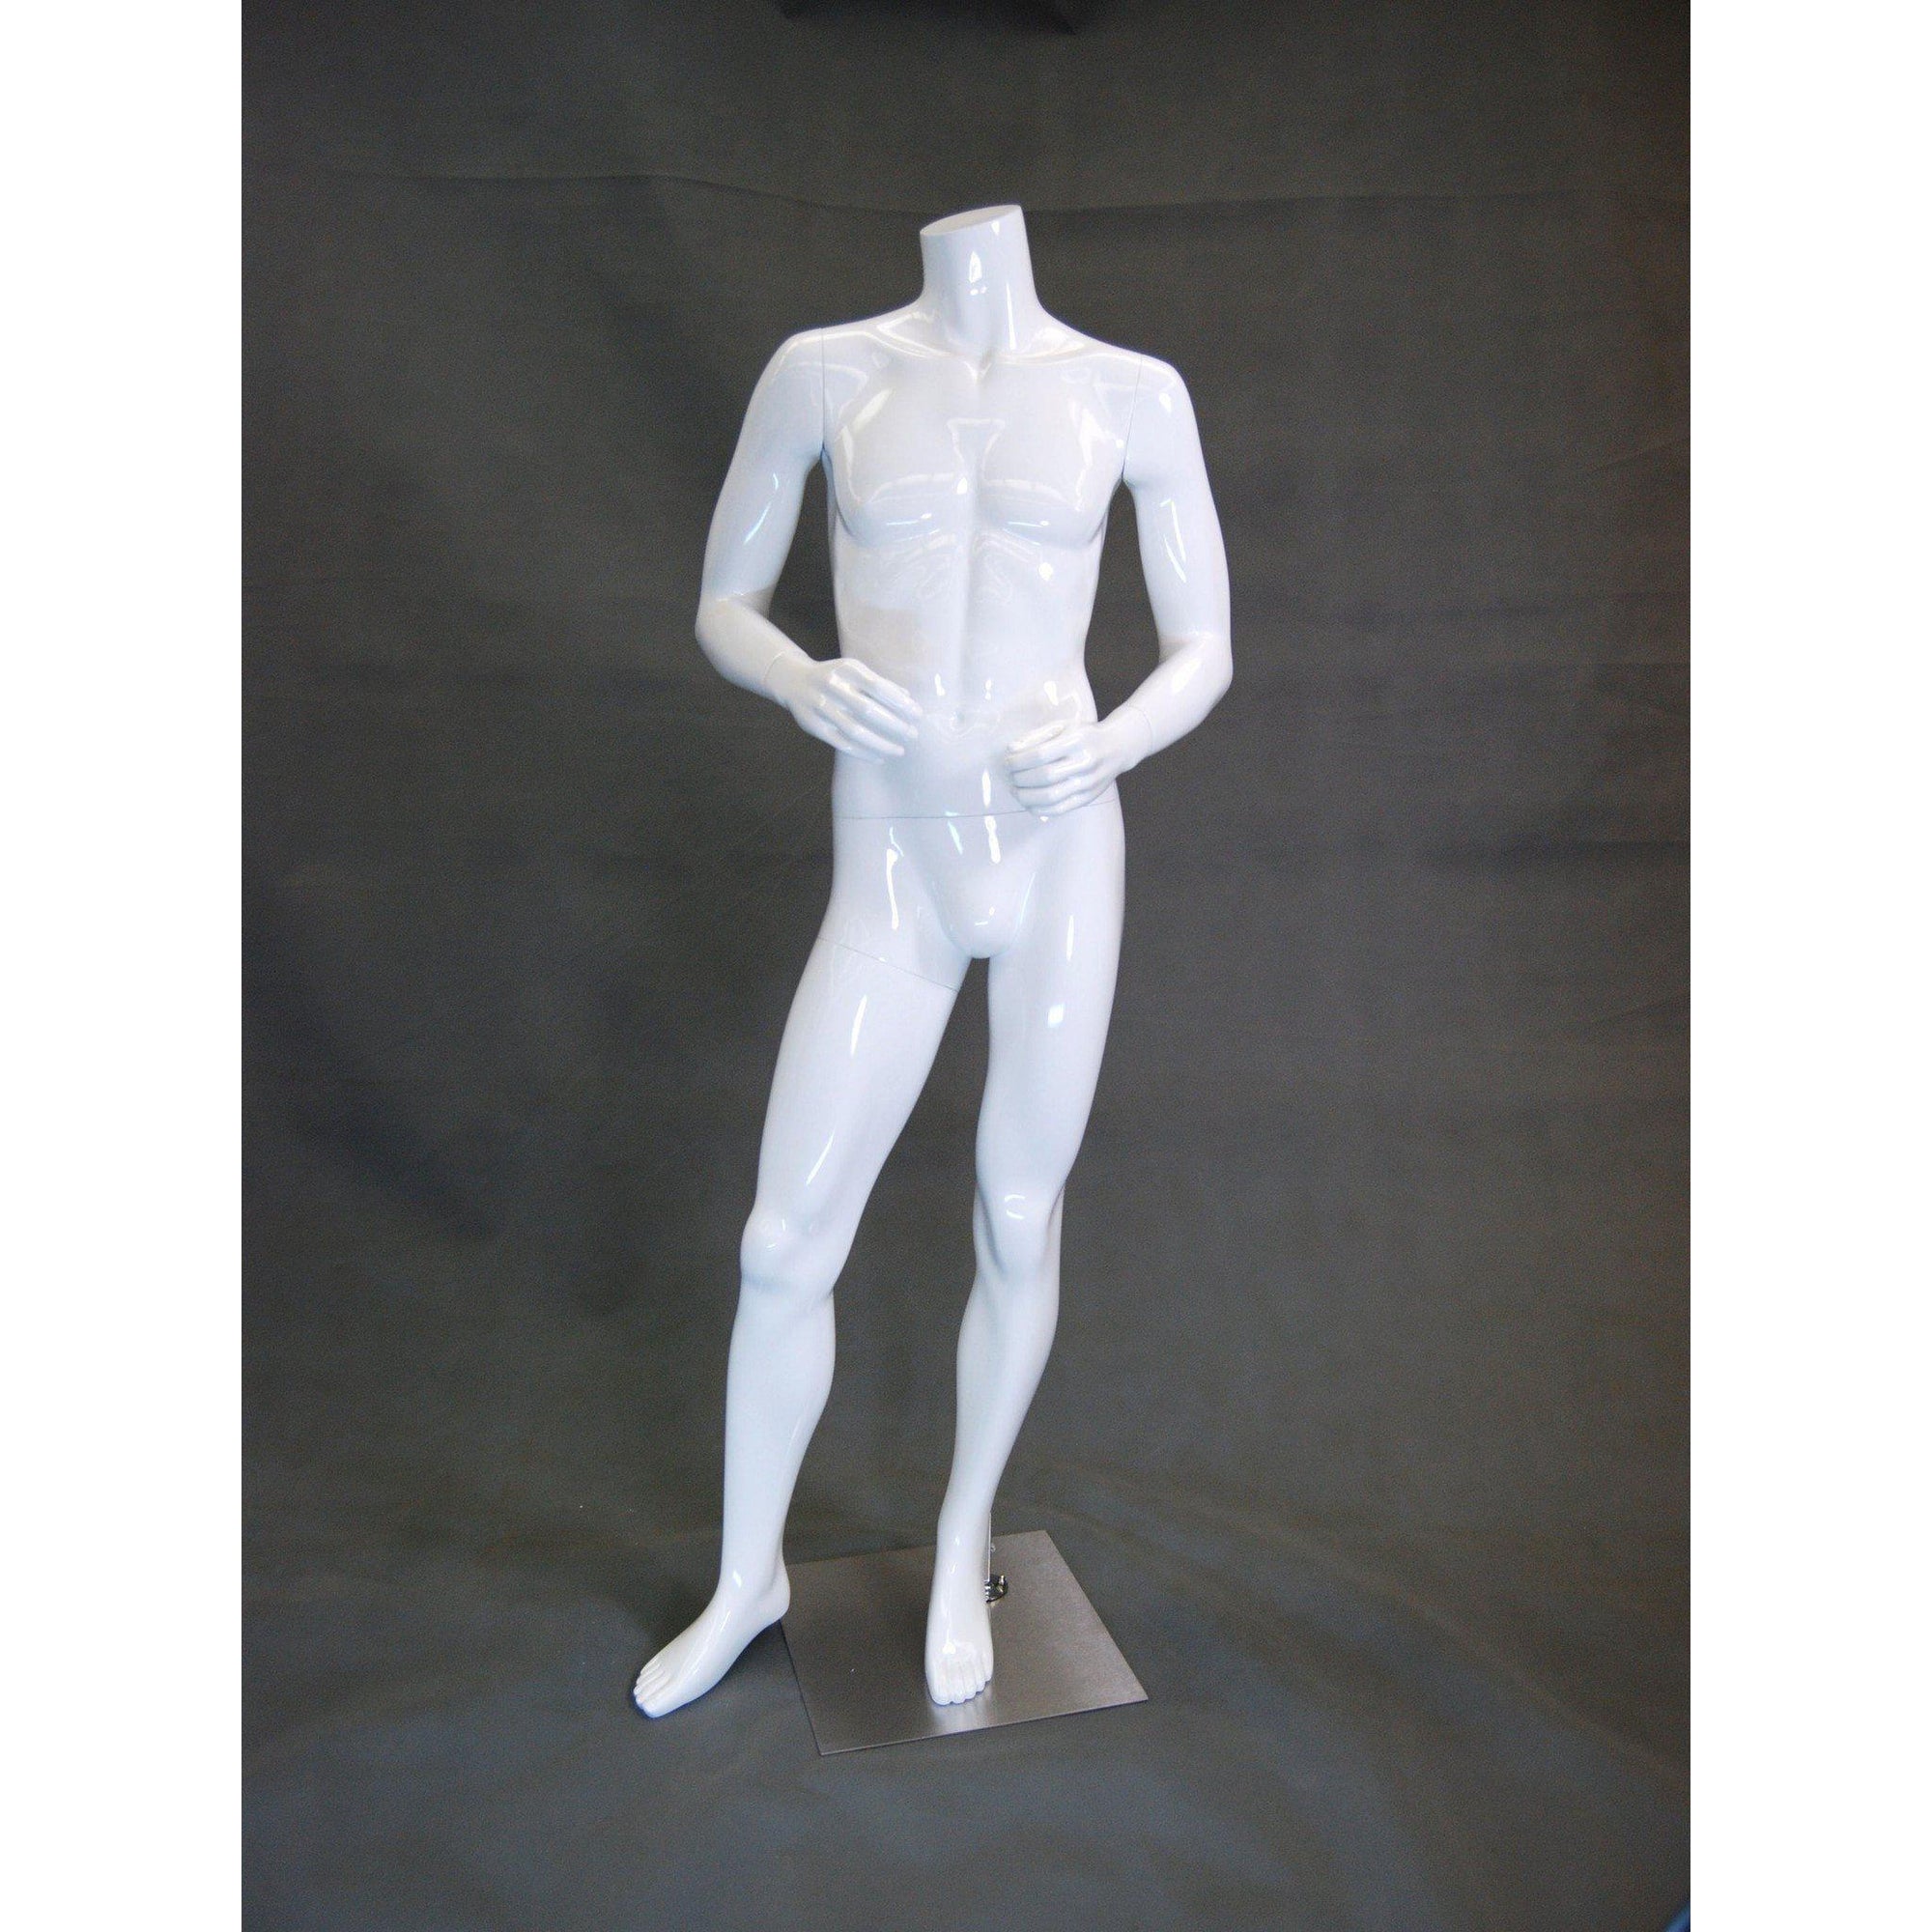 Male Headless Mannequin MM-MA4BW1 - Mannequin Mall